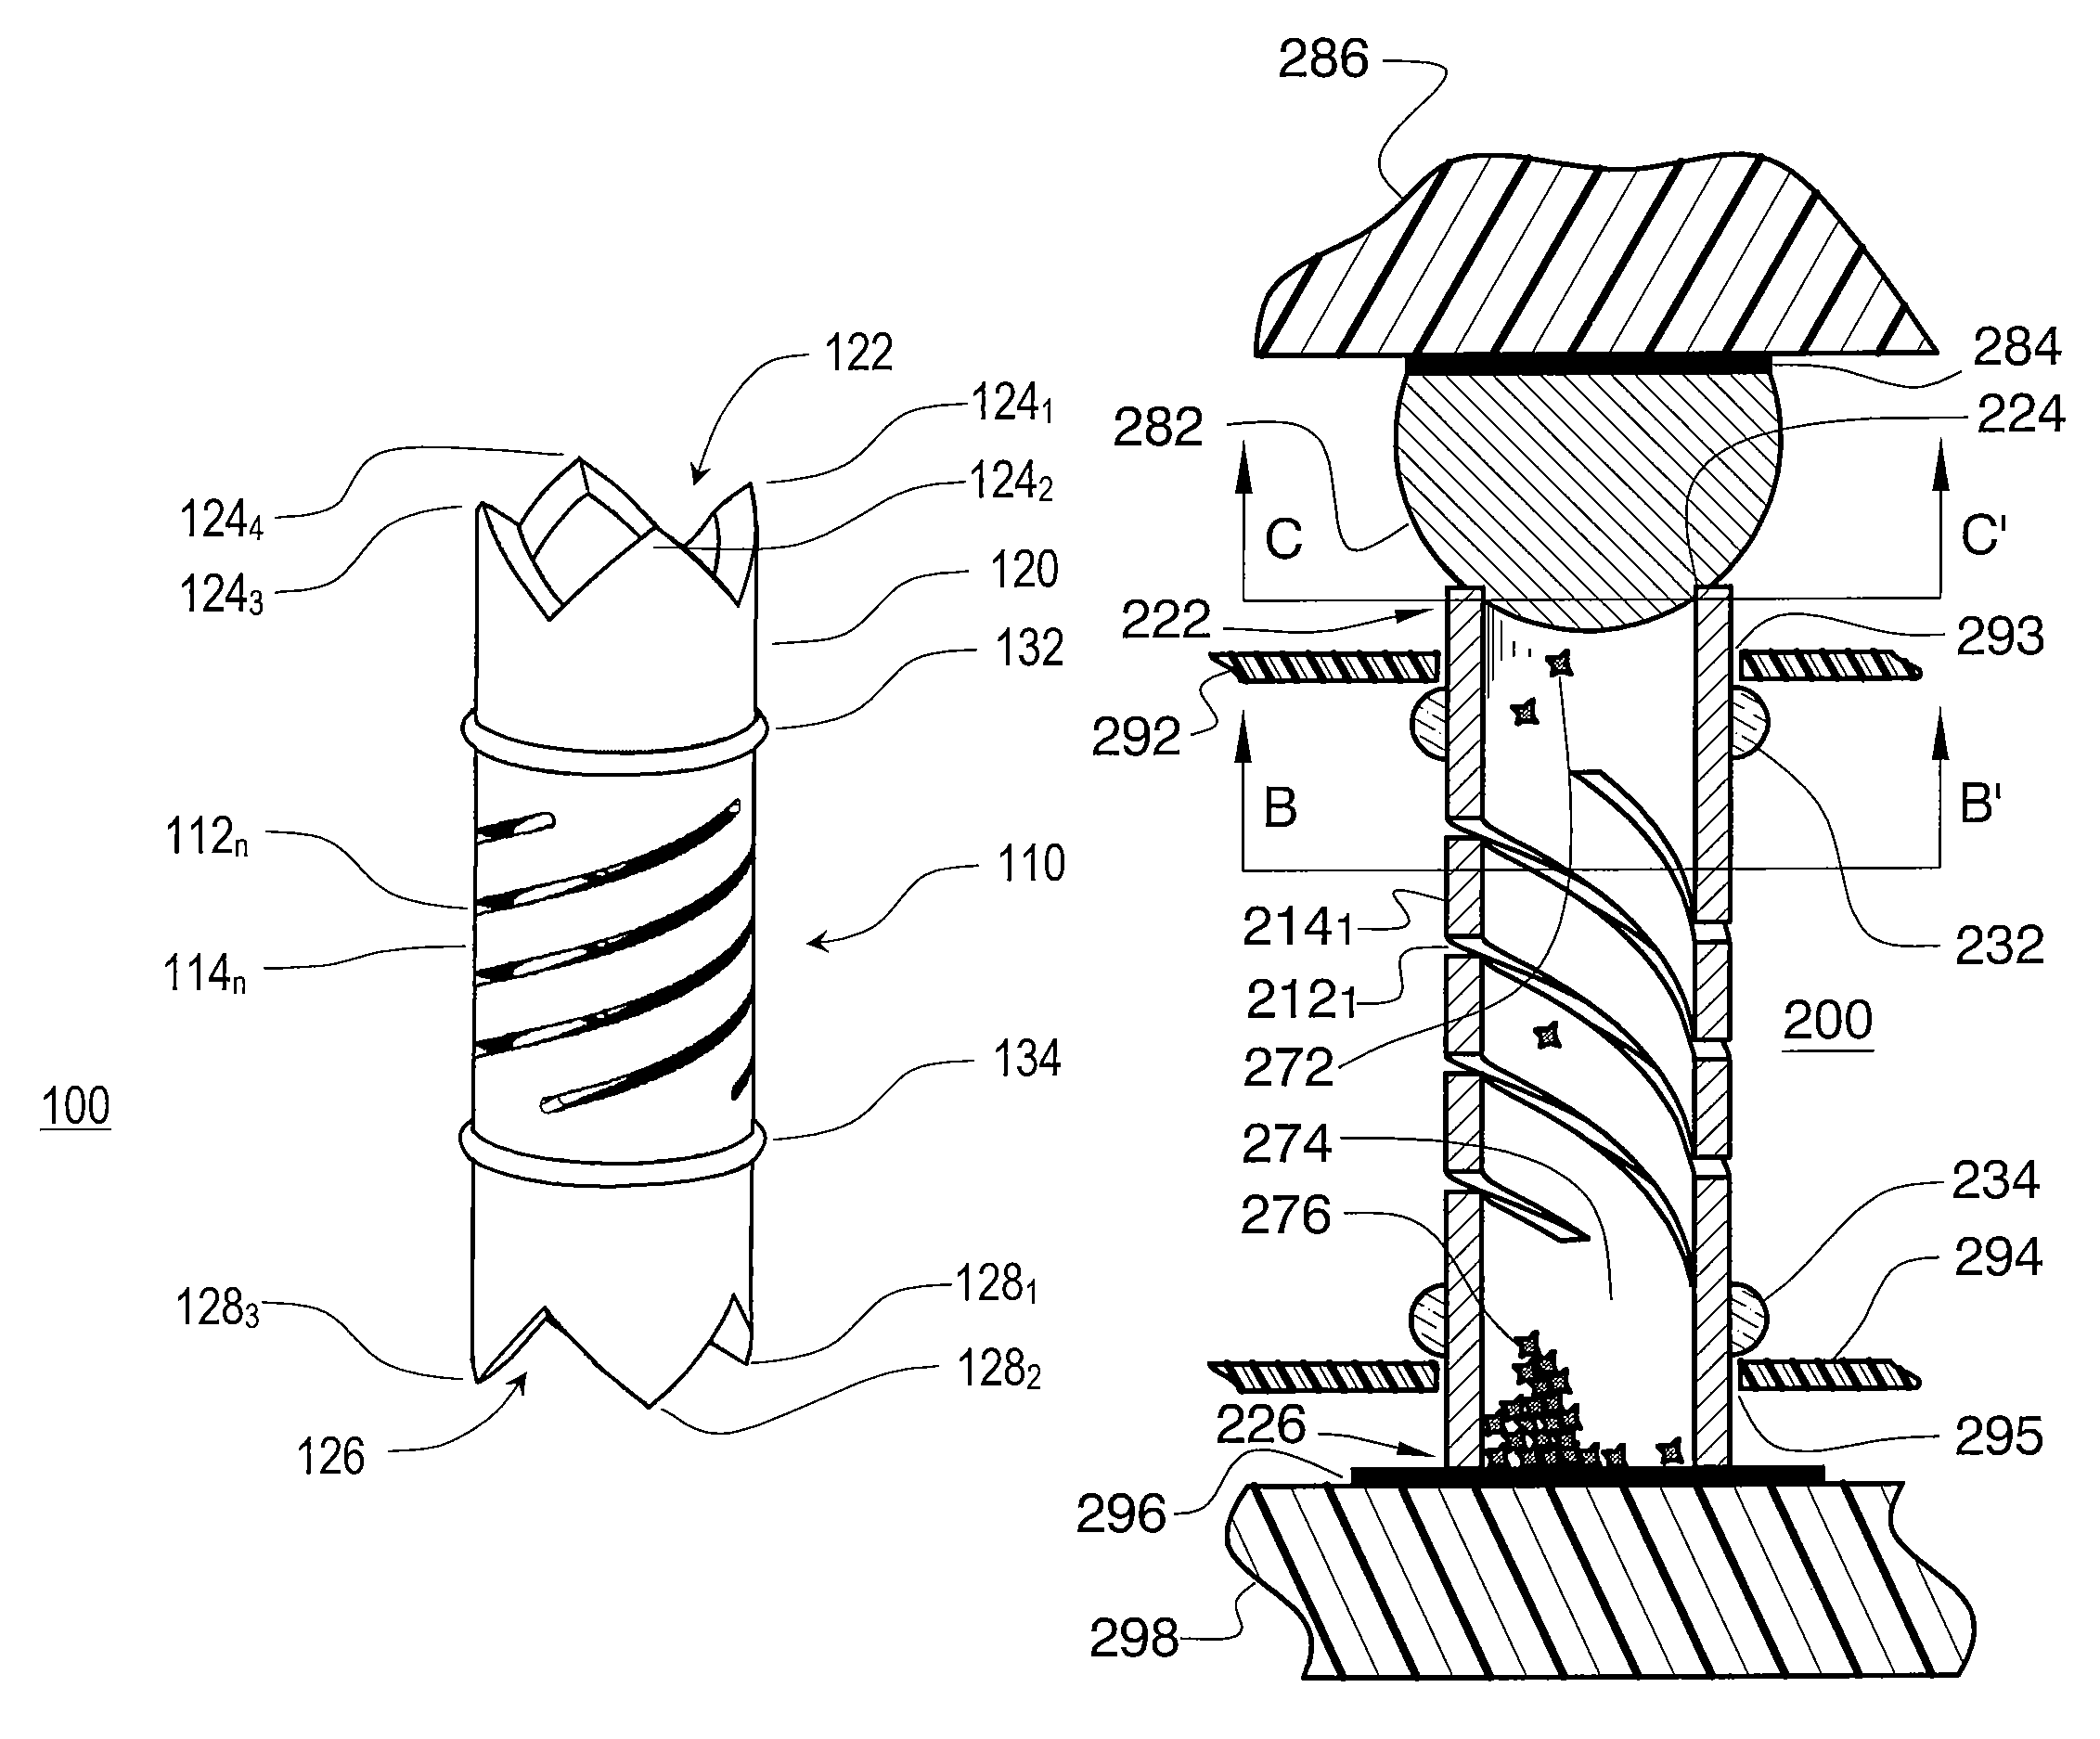 Self-cleaning socket for microelectronic devices